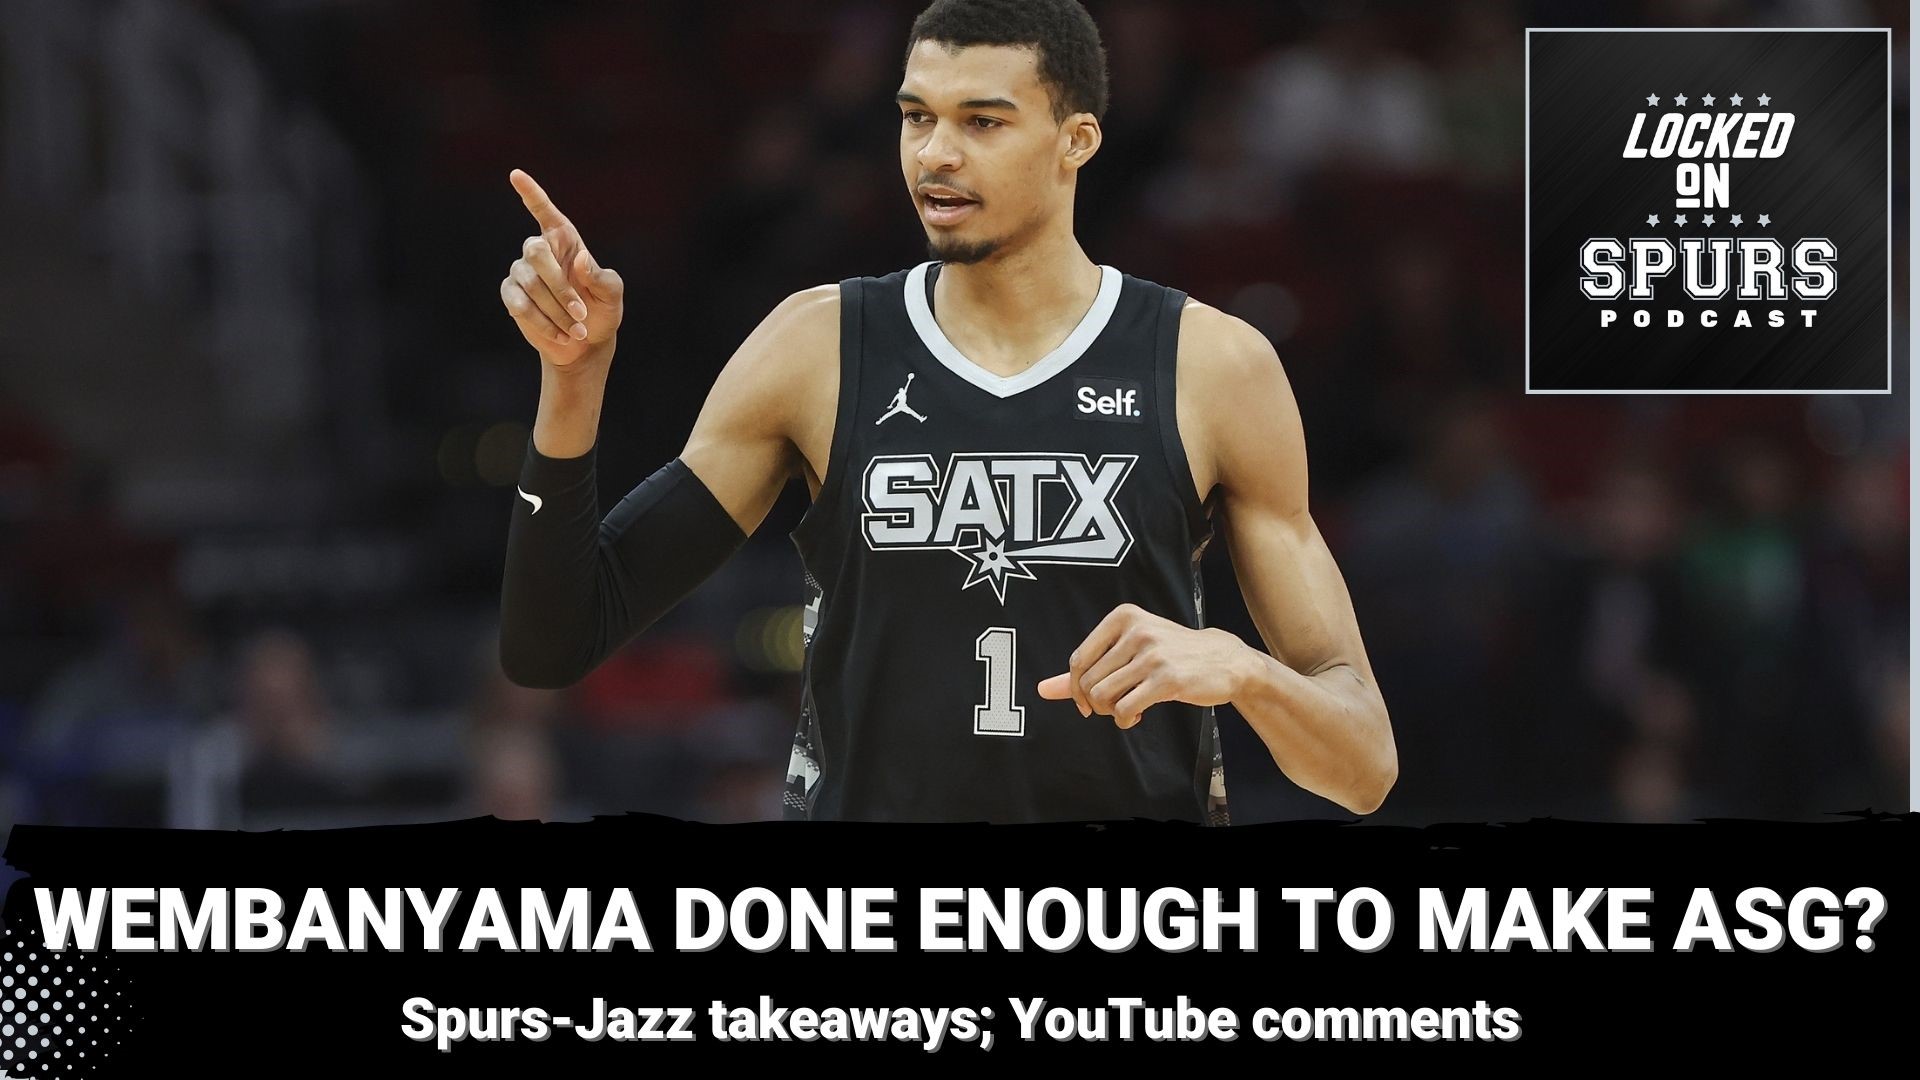 Plus, dissecting yet another Spurs loss and sifting through some YouTube comments from the Silver & Black faithful.